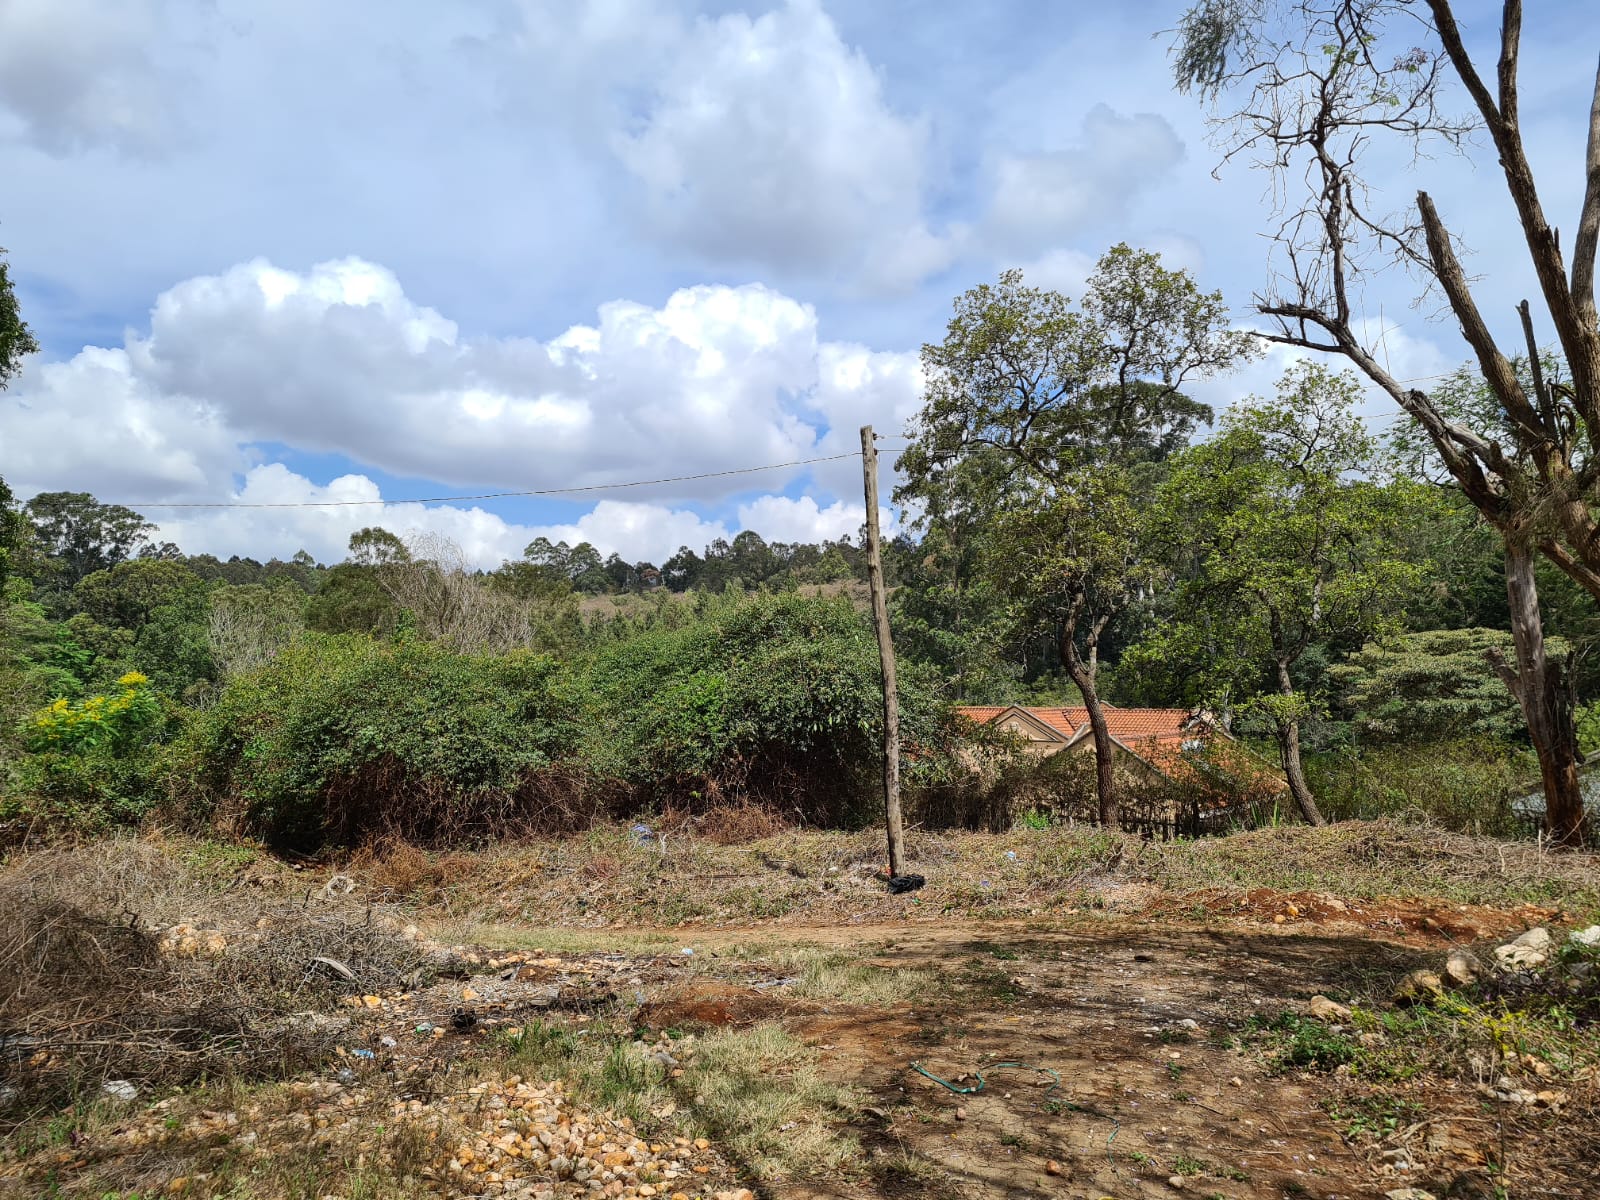 Land in Serene Muthaiga Suburb Available On Sale